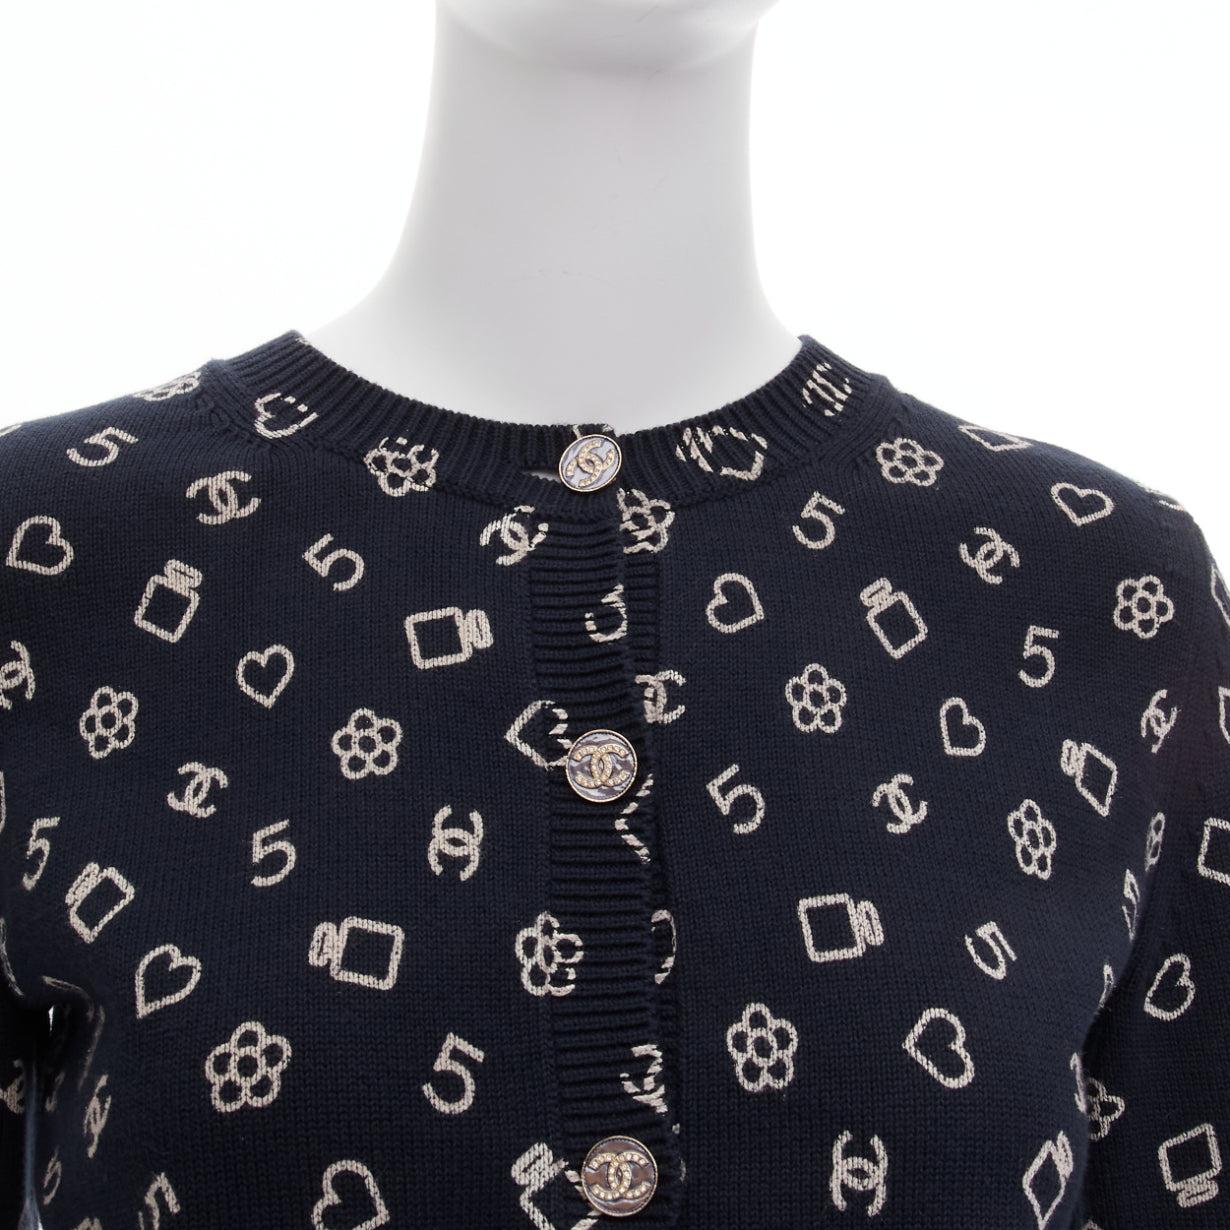 CHANEL 2023 navy white CC 5 perfume logo cotton cropped cardigan FR34 XS
Reference: AAWC/A00530
Brand: Chanel
Designer: Virginie Viard
Collection: 2023
Material: Cotton, Blend
Color: White, Black
Pattern: Logomania
Closure: Button
Extra Details: CC